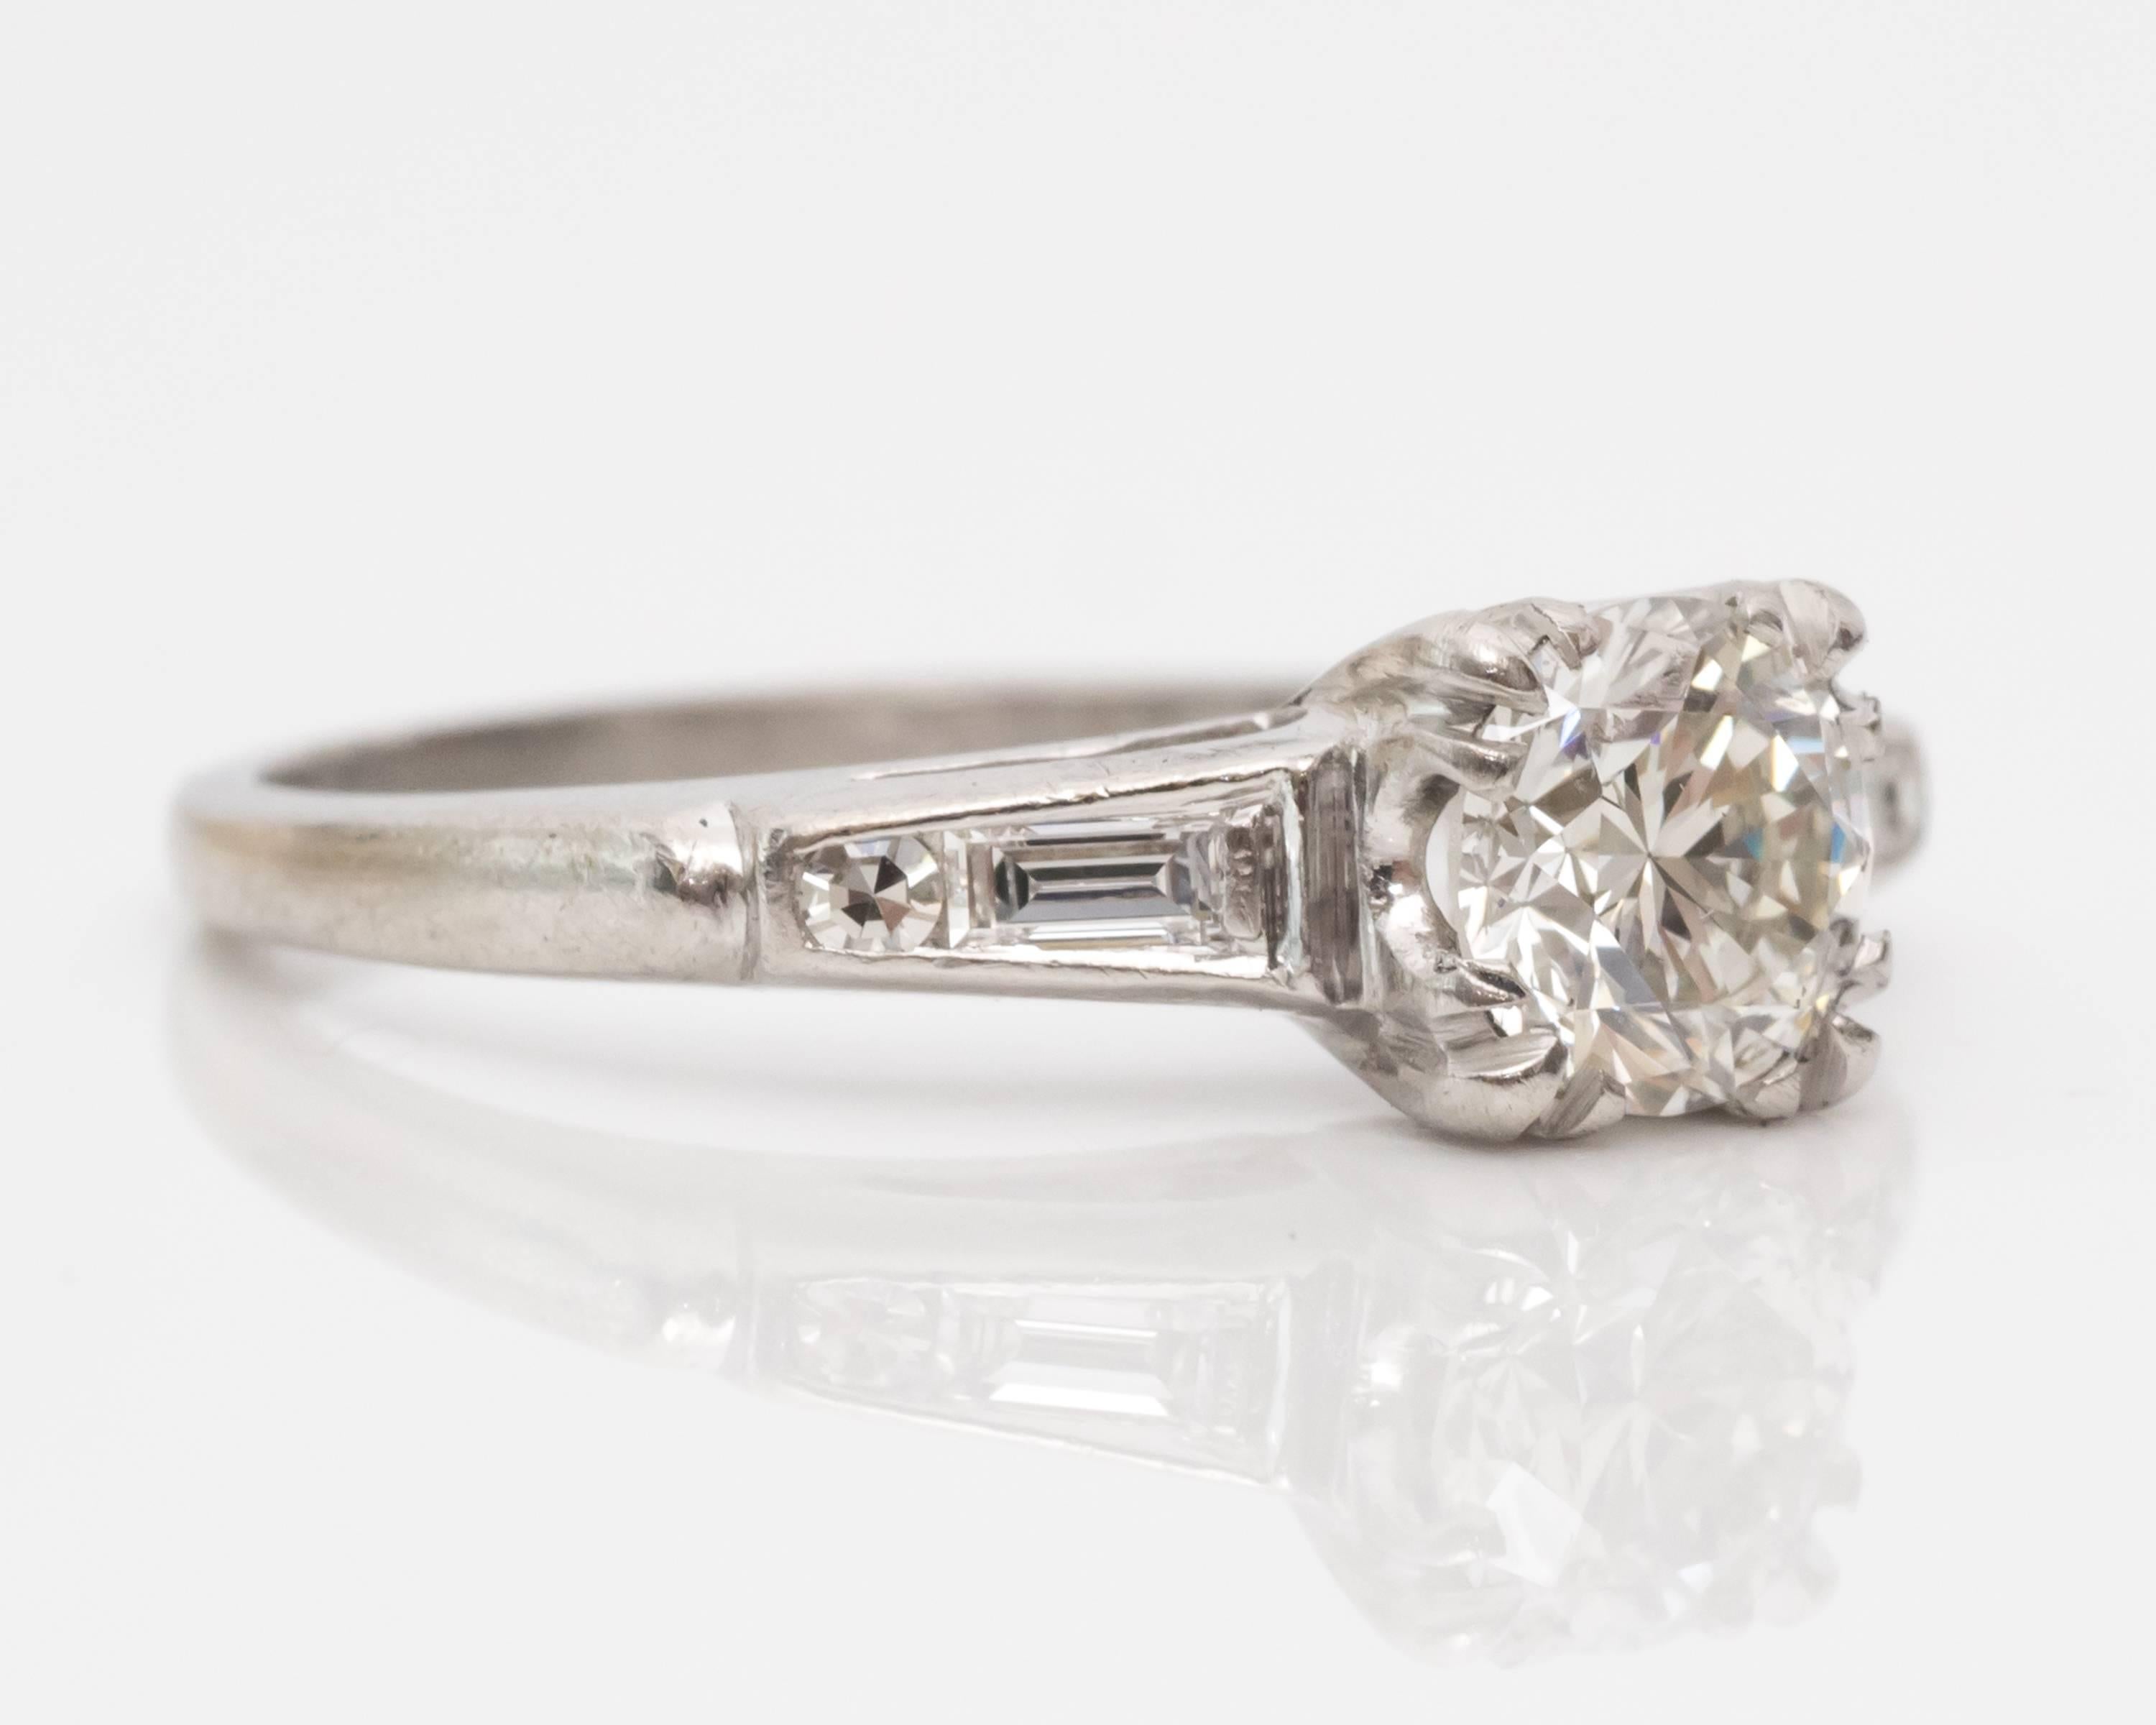 This ring embodies the bold simplicity of the 1940s, with stunning diamonds to suit its style. The center stone is a GIA certified diamond with .74 carat and an old European transitional cut. The diamond is mounted in four triple fishtail prongs.